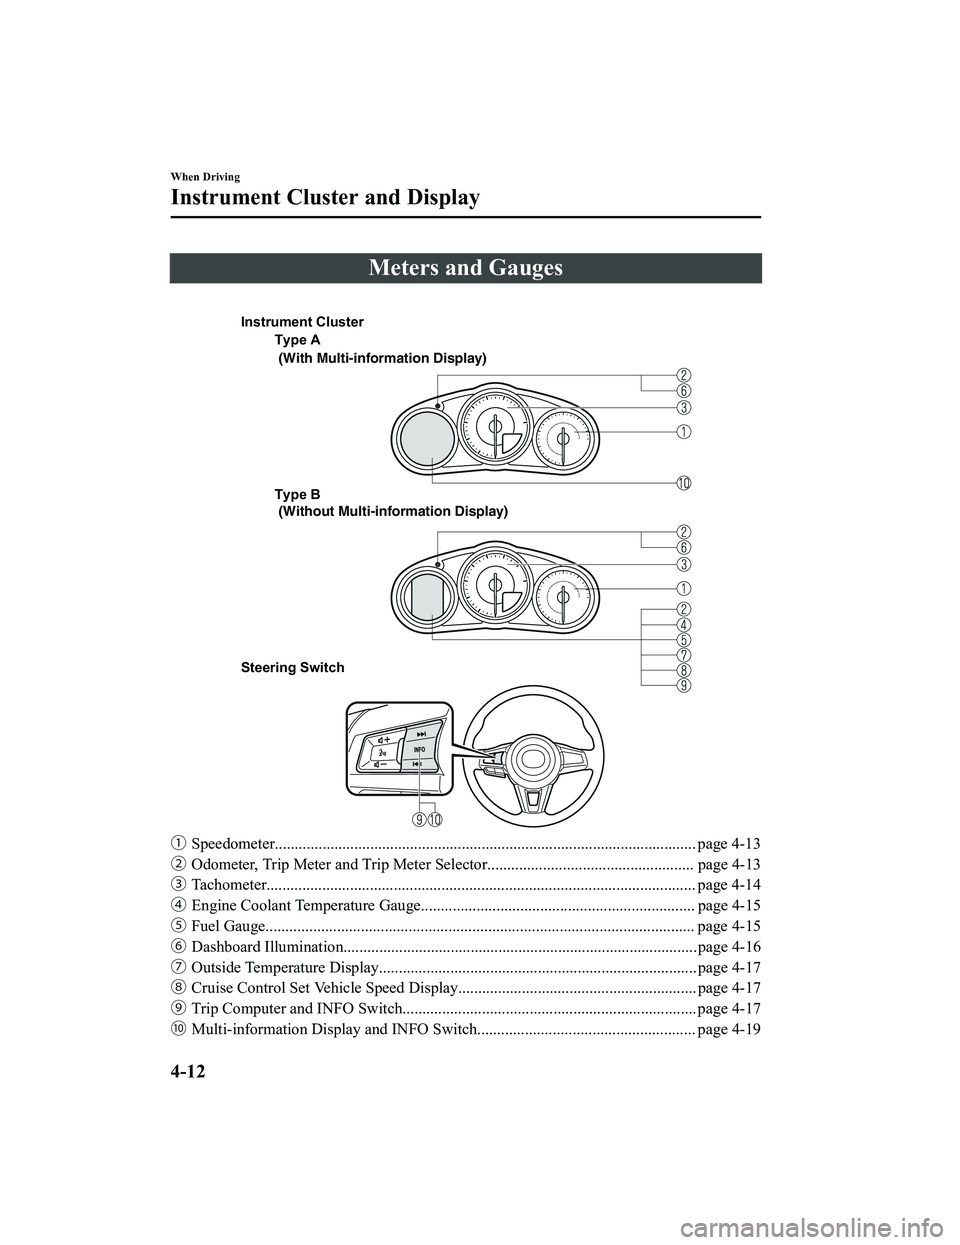 MAZDA MODEL MX-5 MIATA RF 2022  Owners Manual Meters and Gauges
 
Type A
Type B 
Steering Switch  (With Multi-information Display)
 (Without Multi-information Display)
Instrument Cluster
ƒ
Speedometer............................................